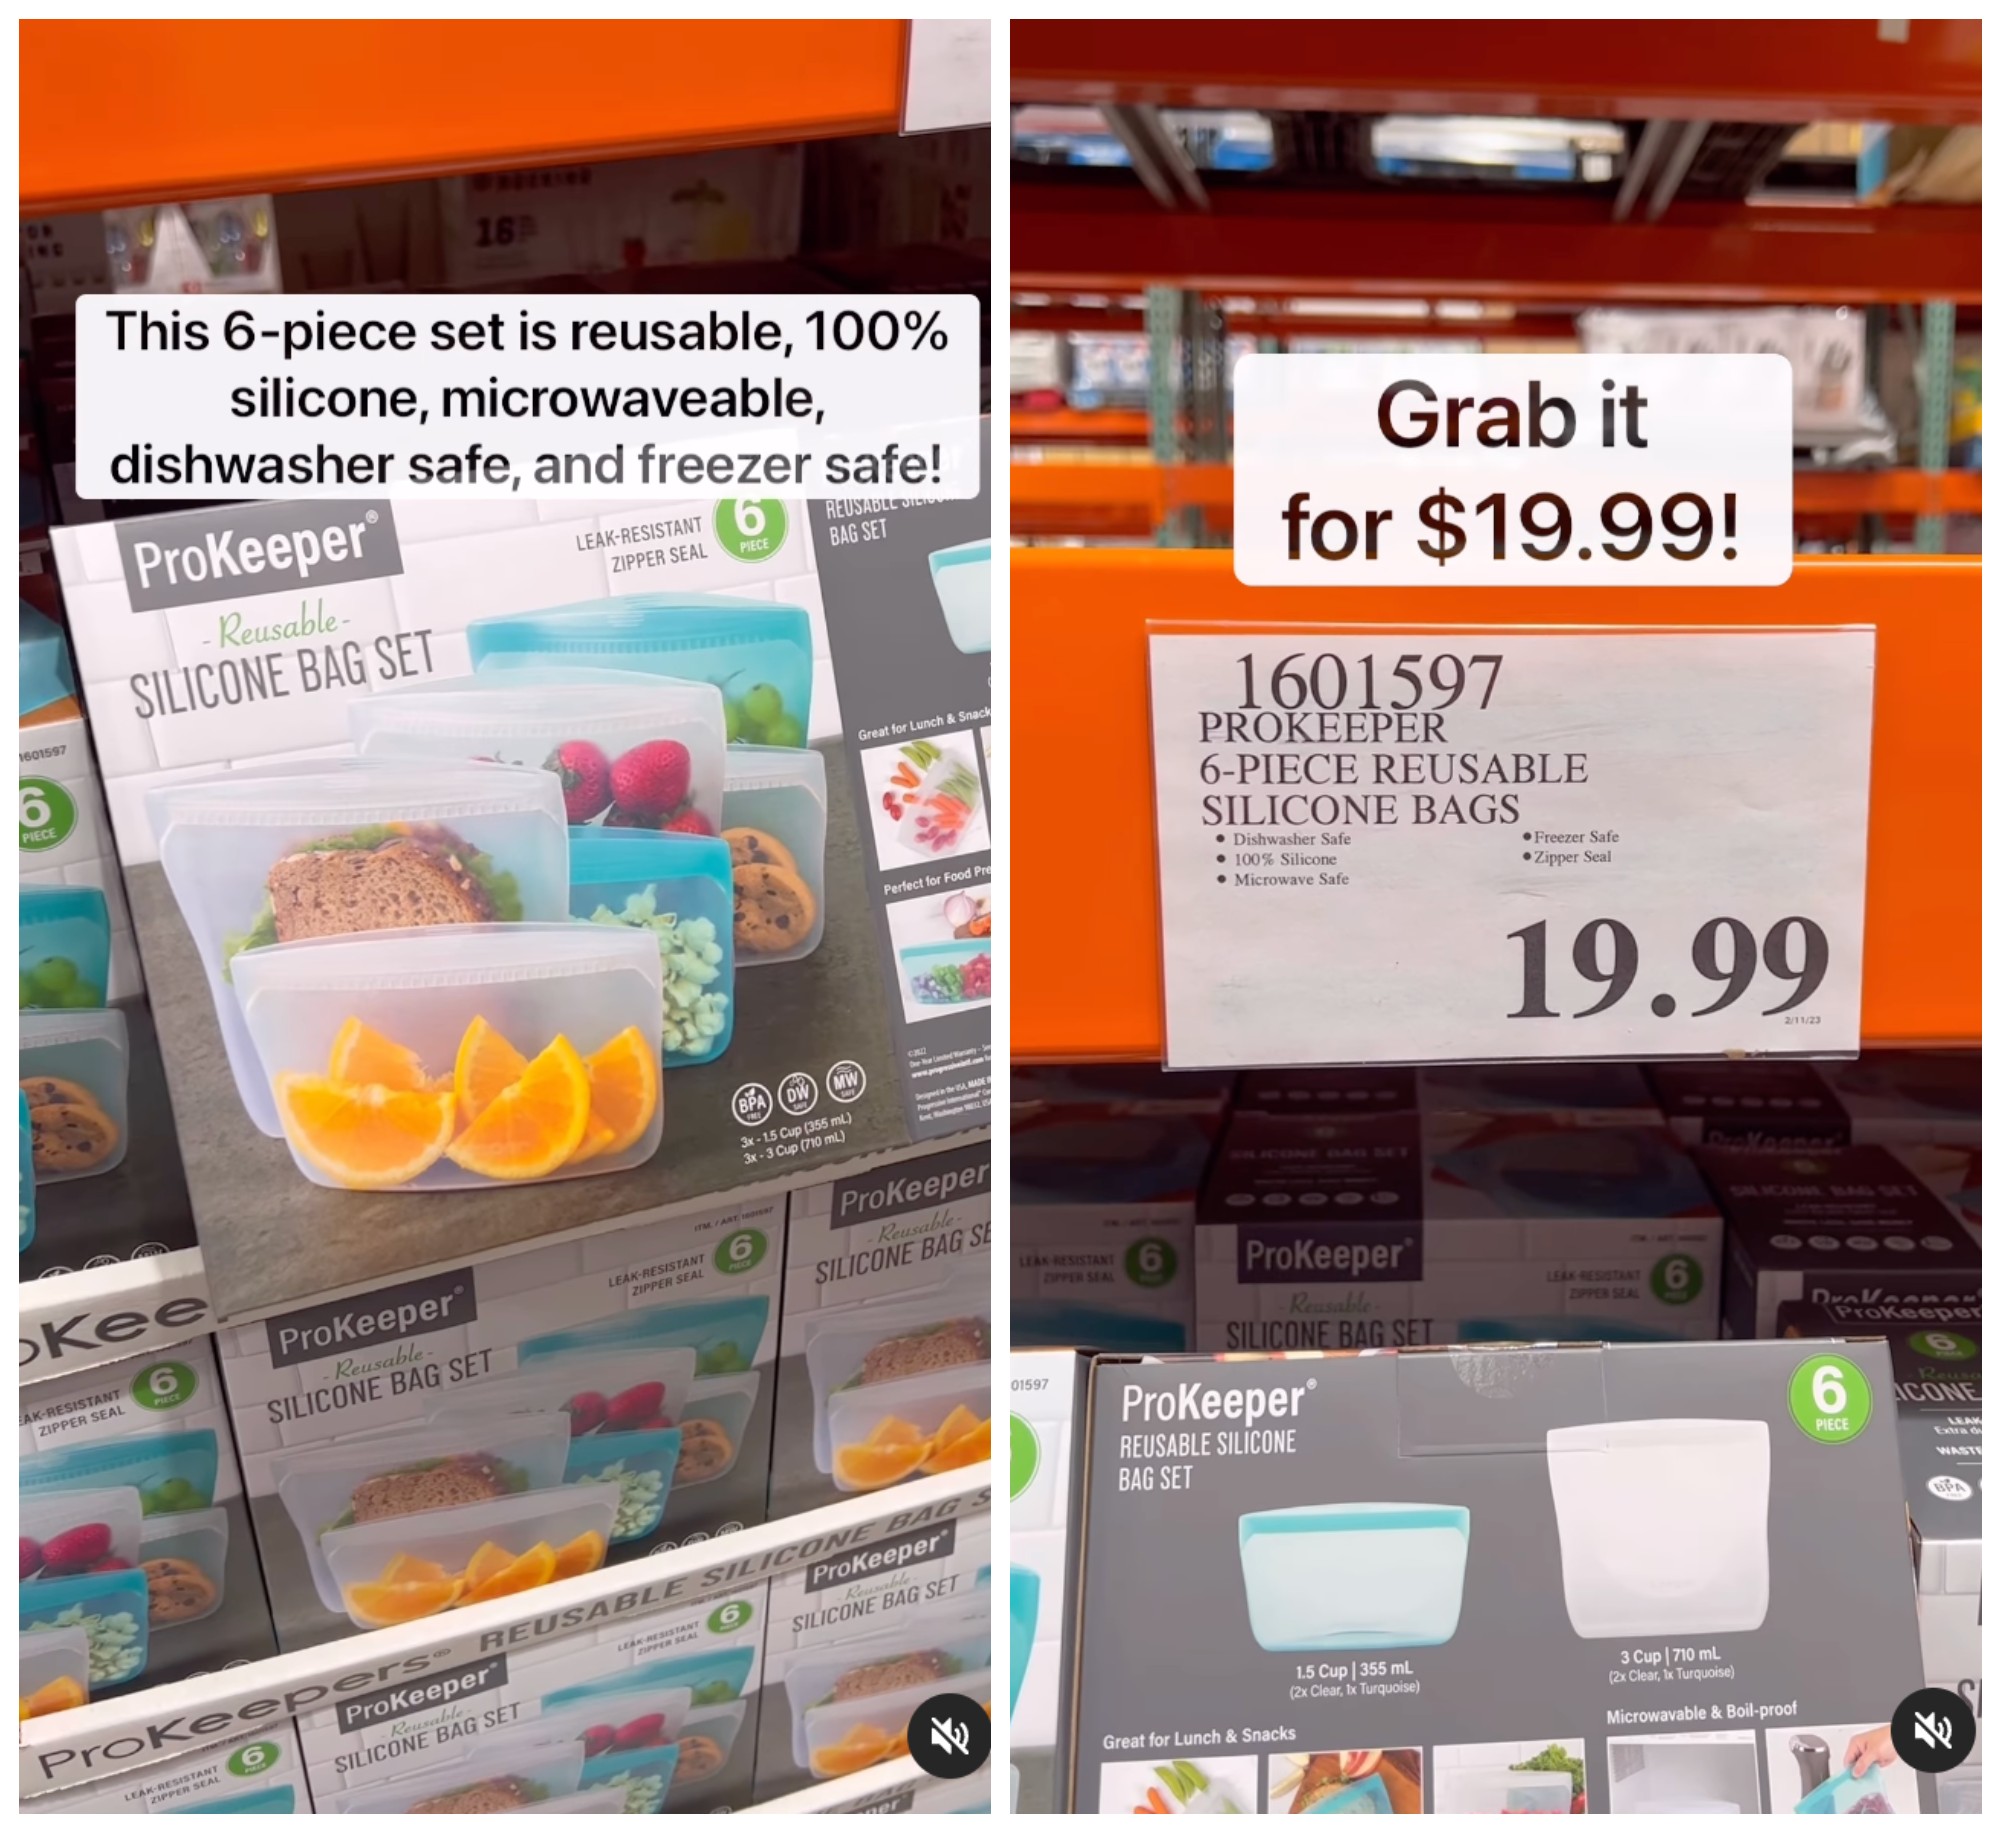 Costco has Snapware for sale now at my store (19.99). What is your